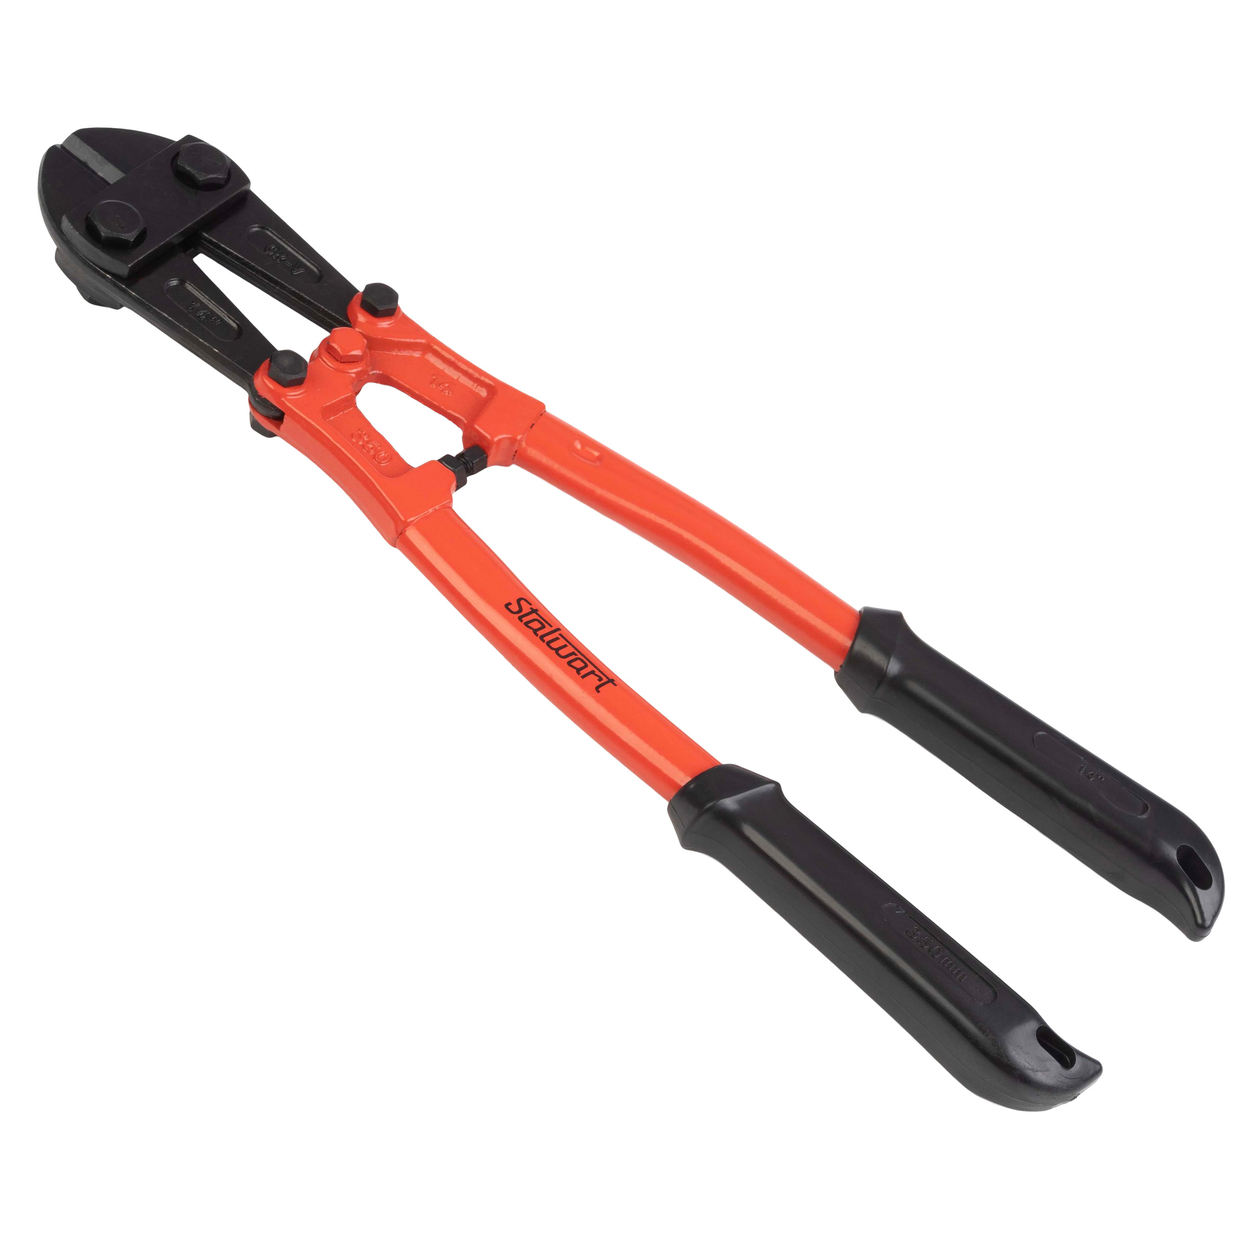 Bolt Cutter Drop Forged Alloy Steel Ergonomic Grips Cuts Chains - 18inch